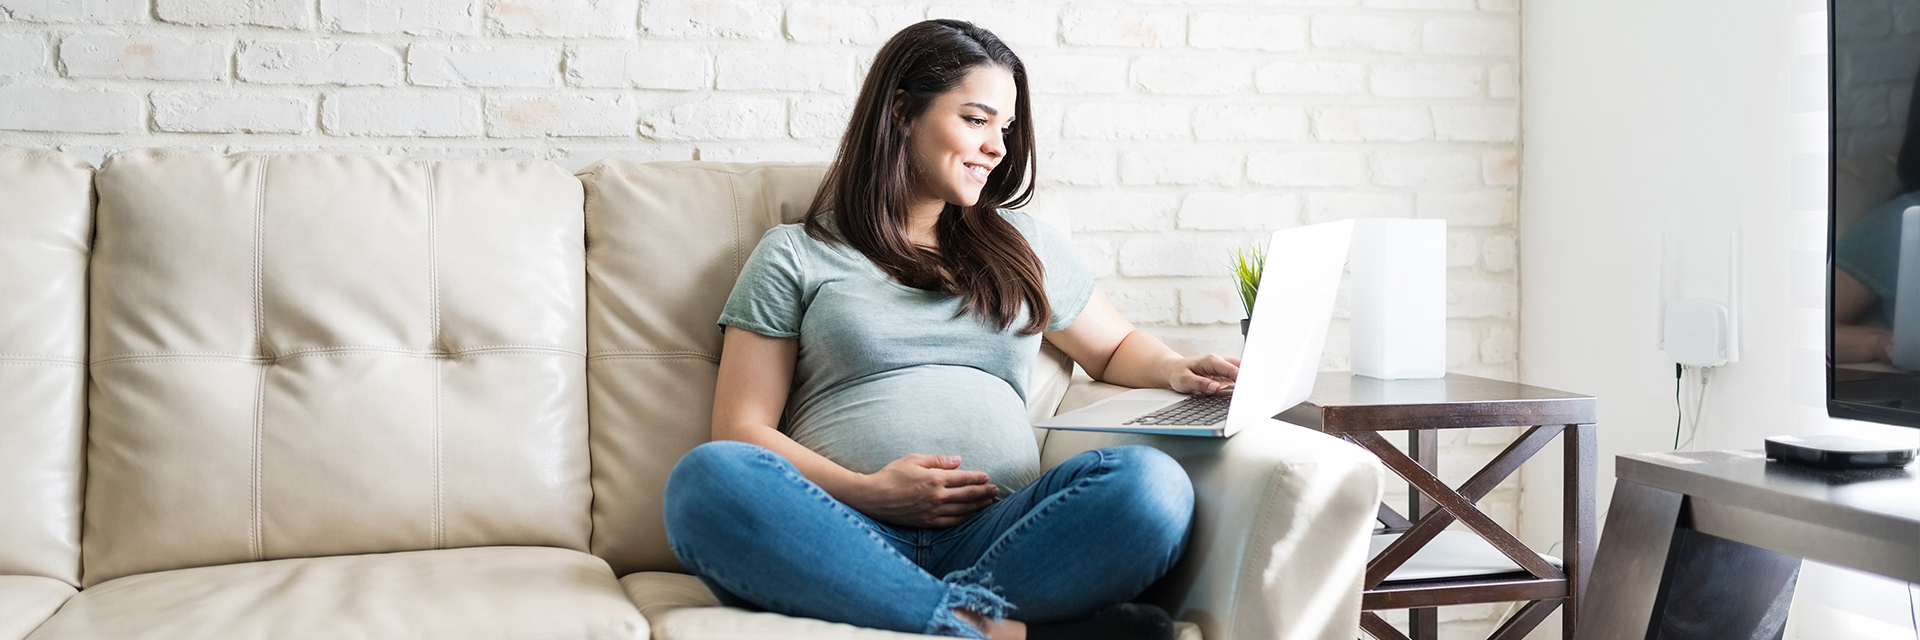 Pregnant woman on couch using laptop